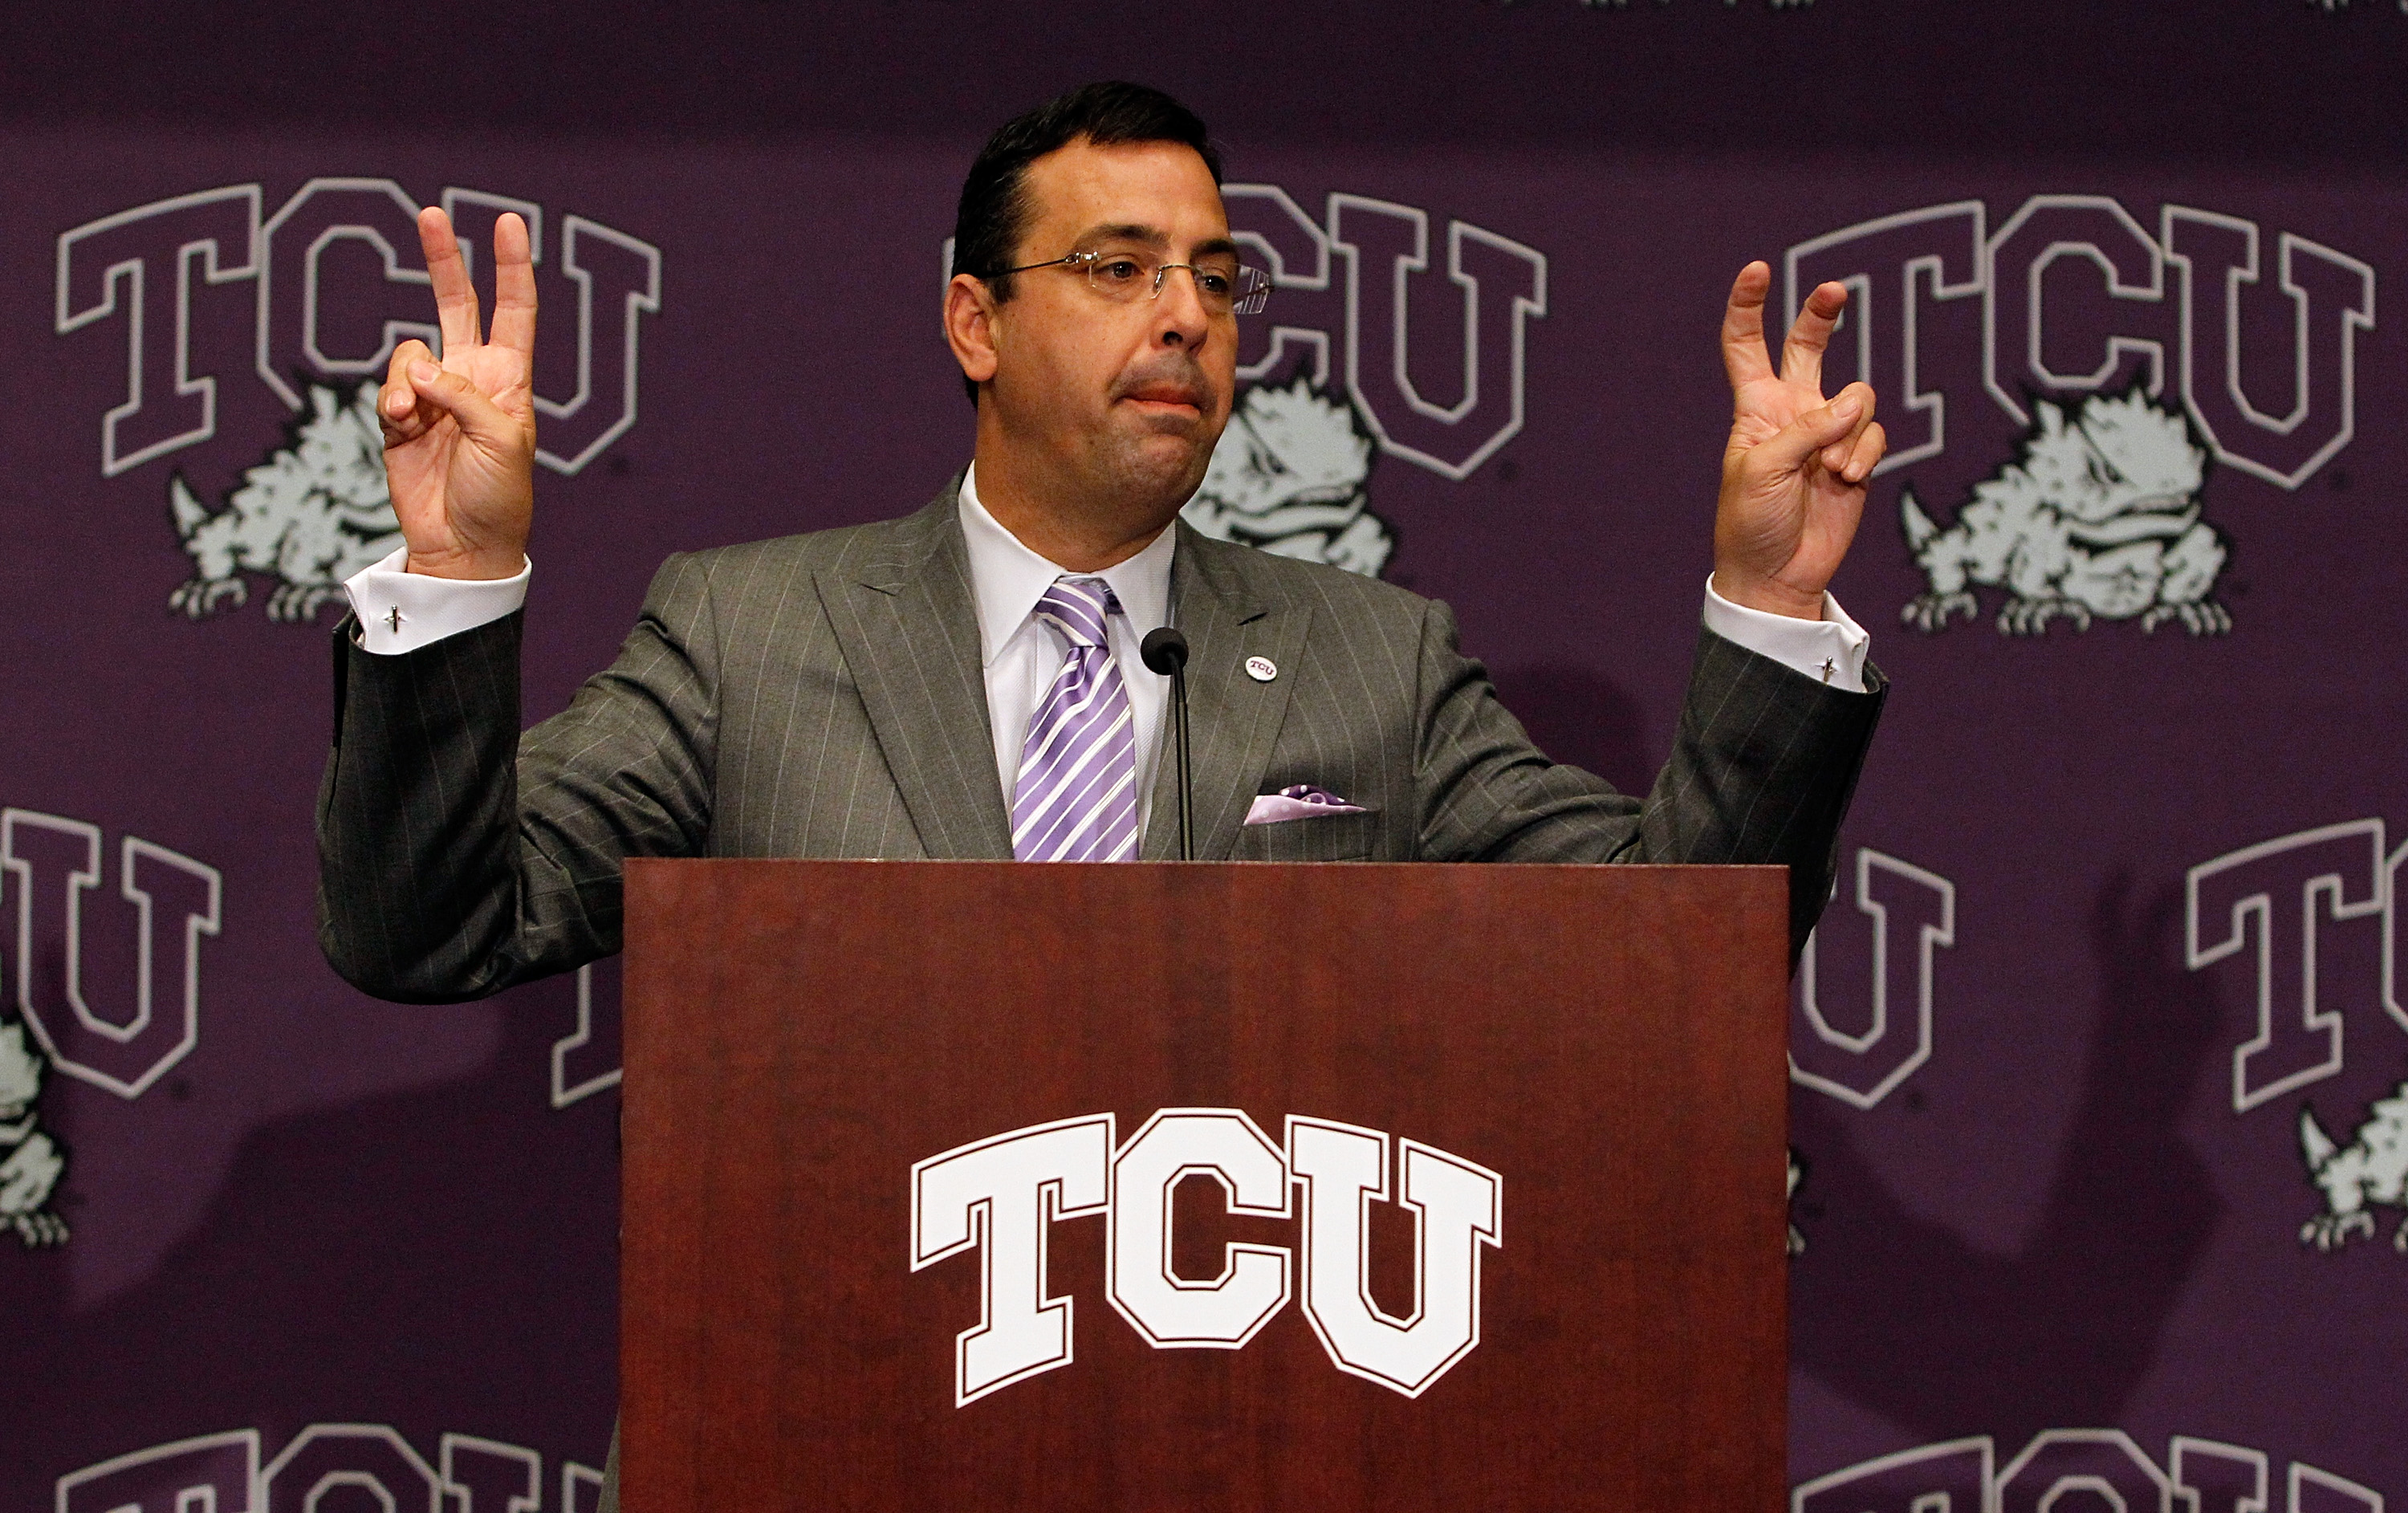 DALLAS - NOVEMBER 29:  Texas Christian University Athletics Director Chris Del Conte talks with the media after TCU accepted an invitation for full membership into The Big East Conference on November 29, 2010 in Fort Worth, Texas.  TCU will leave the Moun